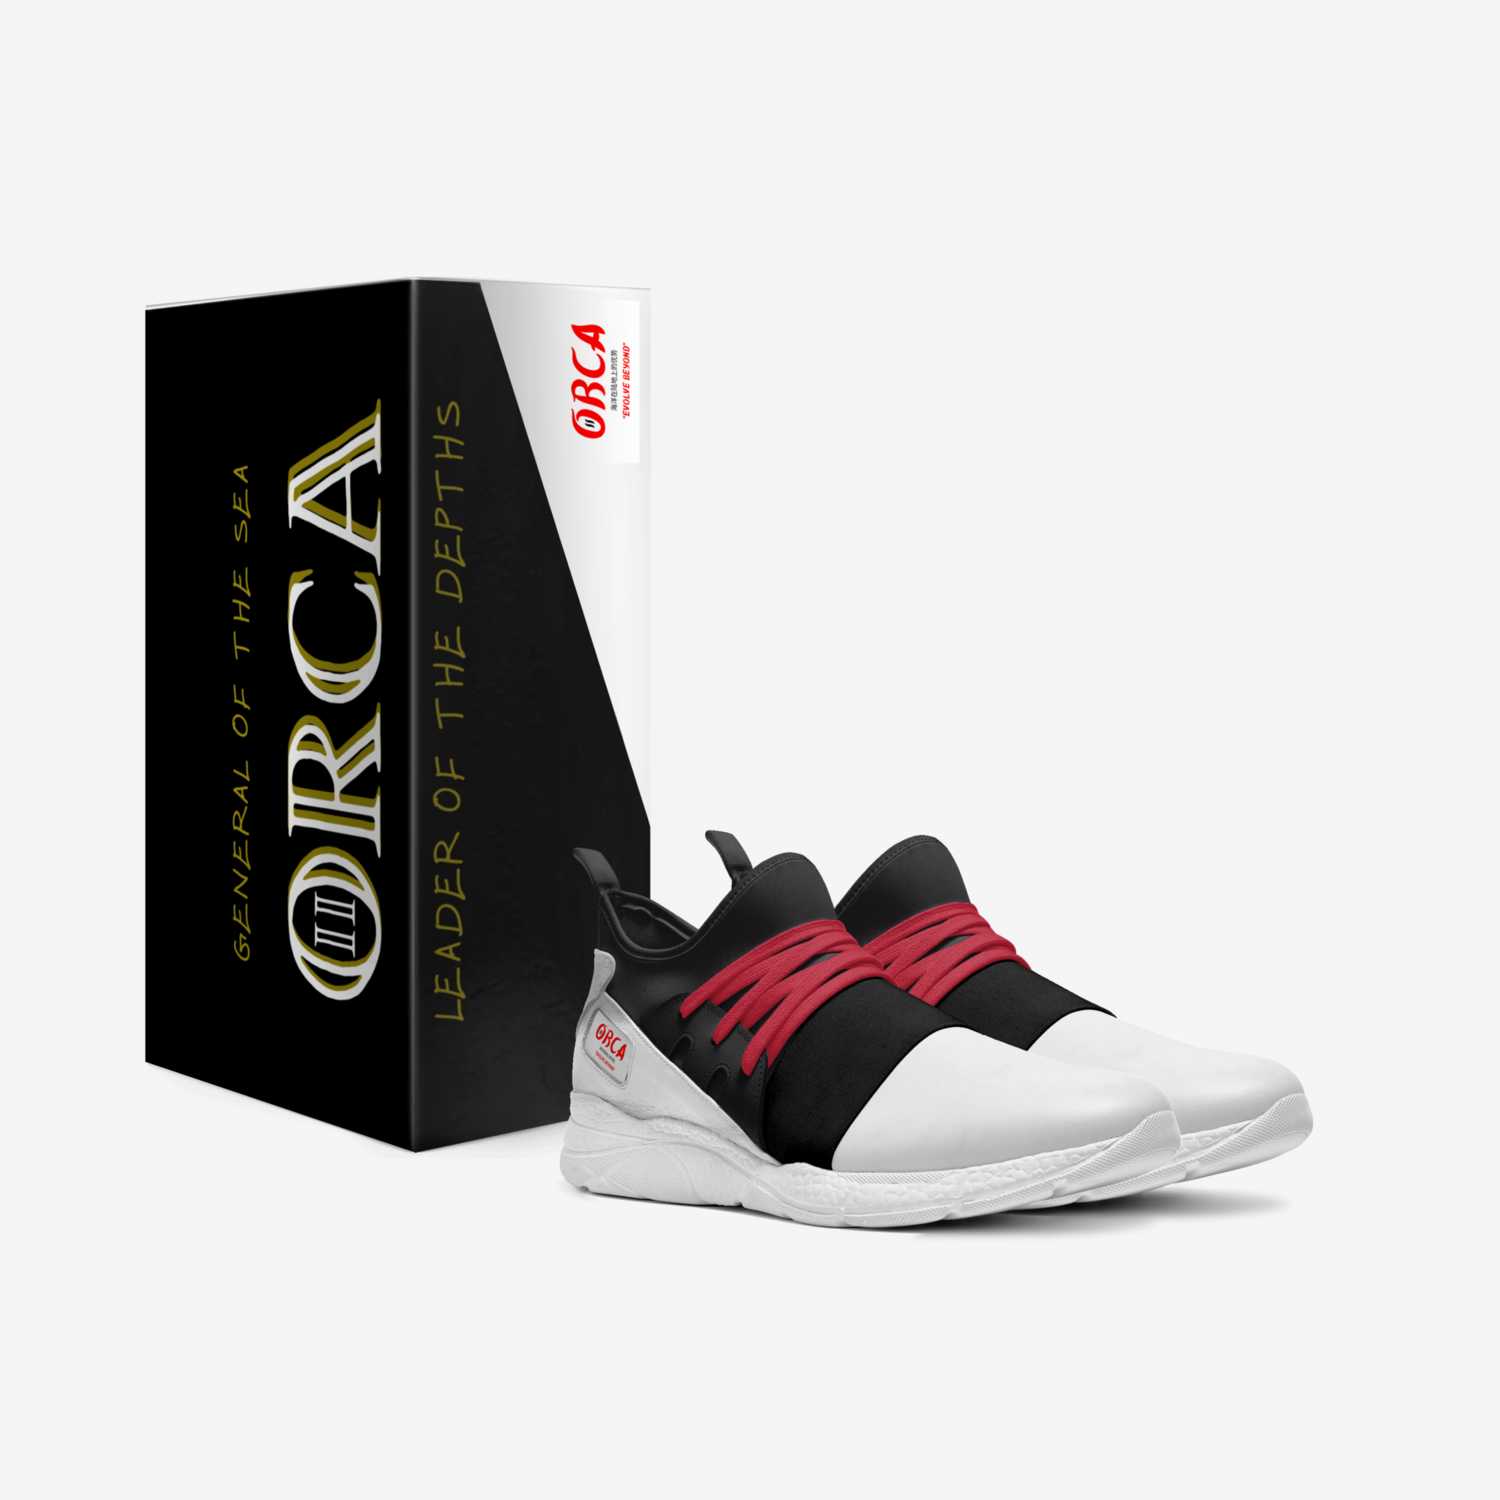 ORCA 7 custom made in Italy shoes by Avrage2savage Luxury | Box view